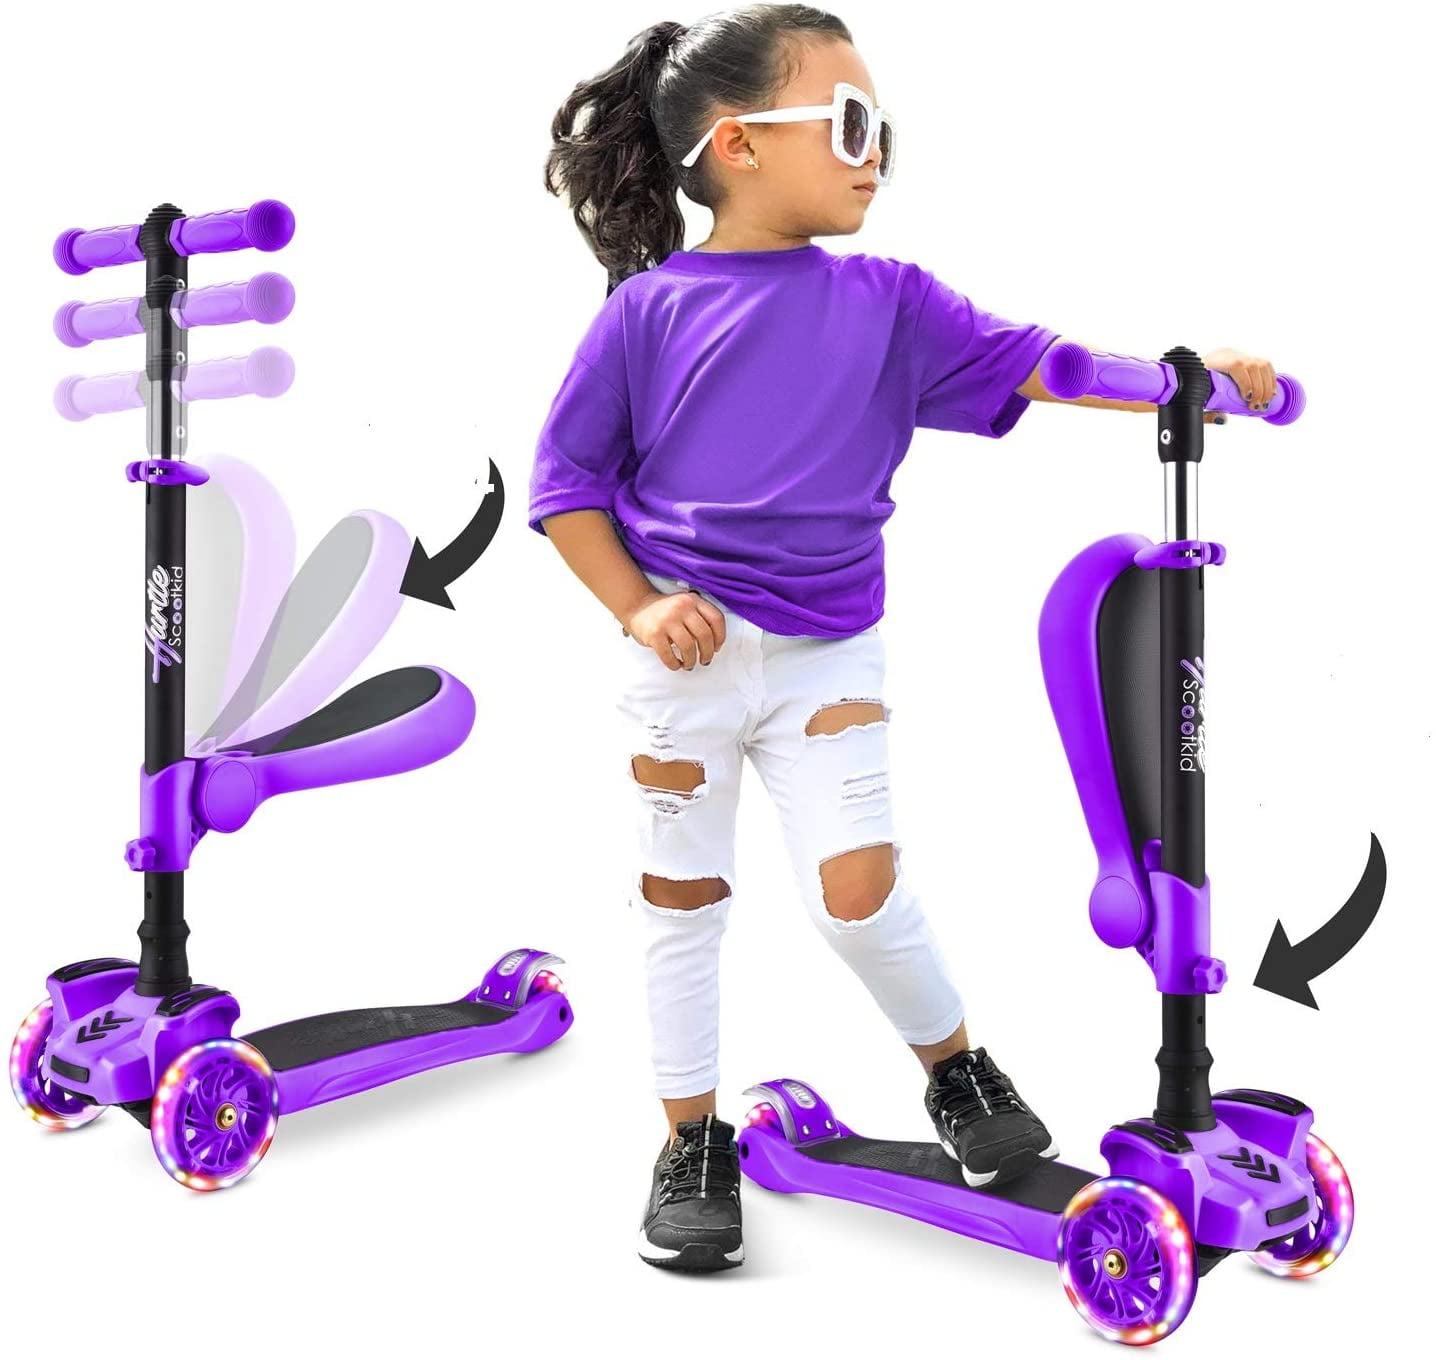 Details about   CITYGLIDE C200 Kick Scooter for Teens-Foldable,Lightweight,Adjustable 